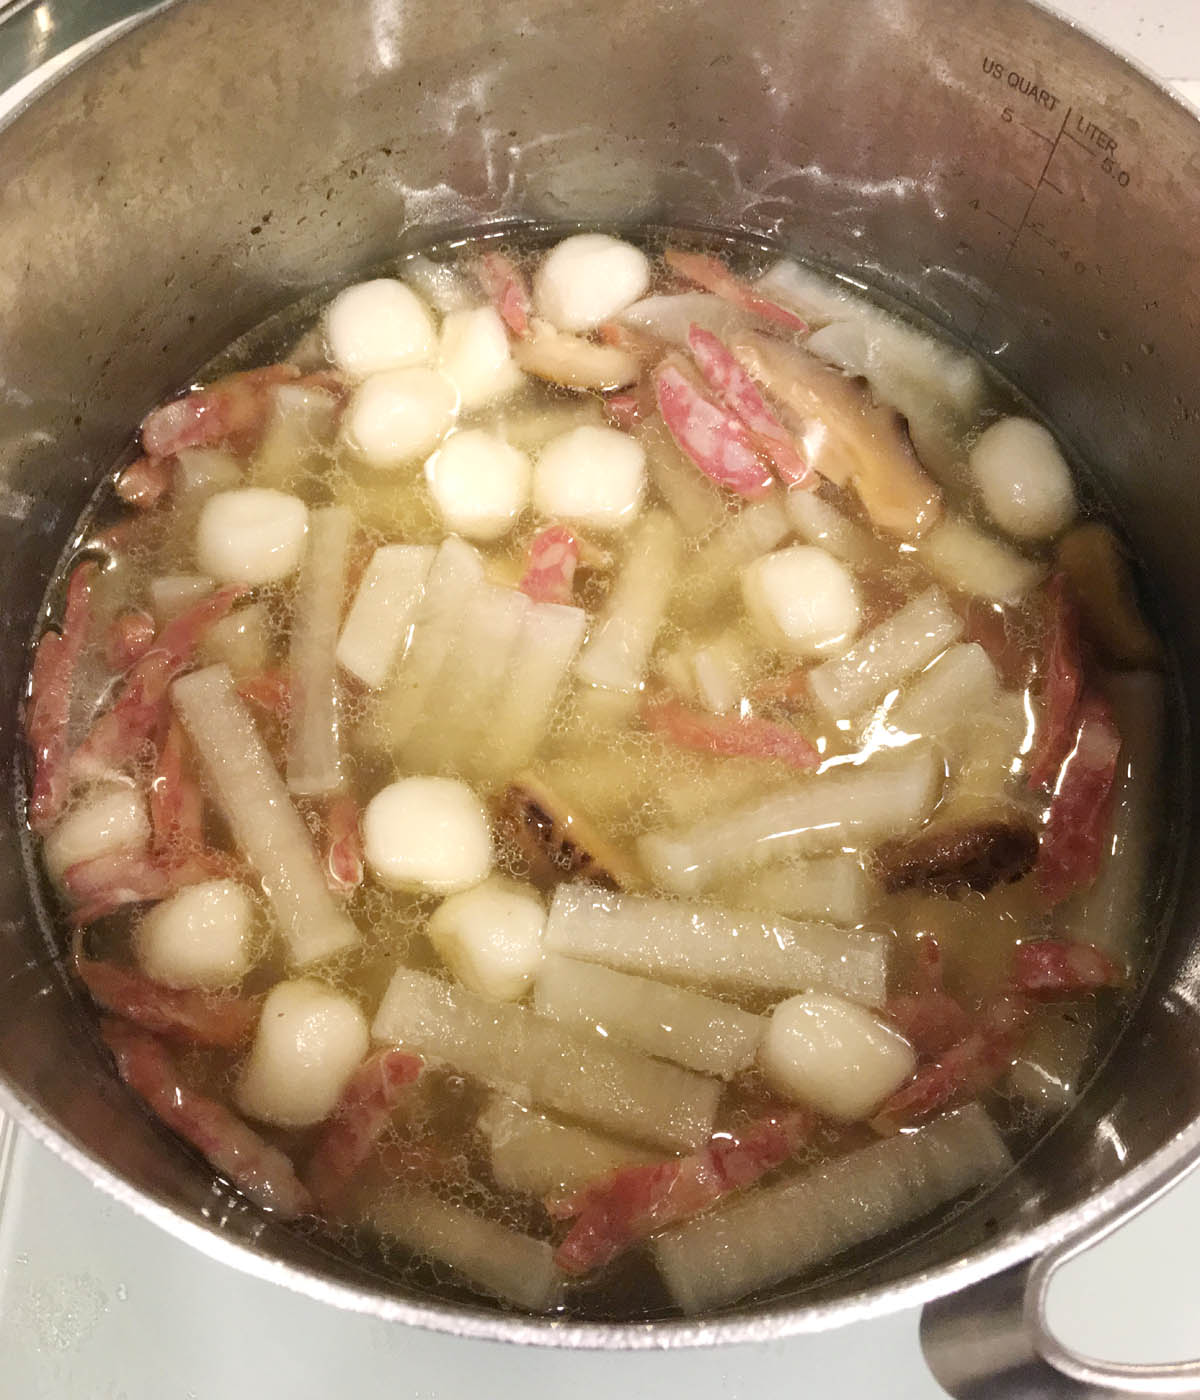 A metal pot containing white dough balls, pink sausage and radish strips in soup.